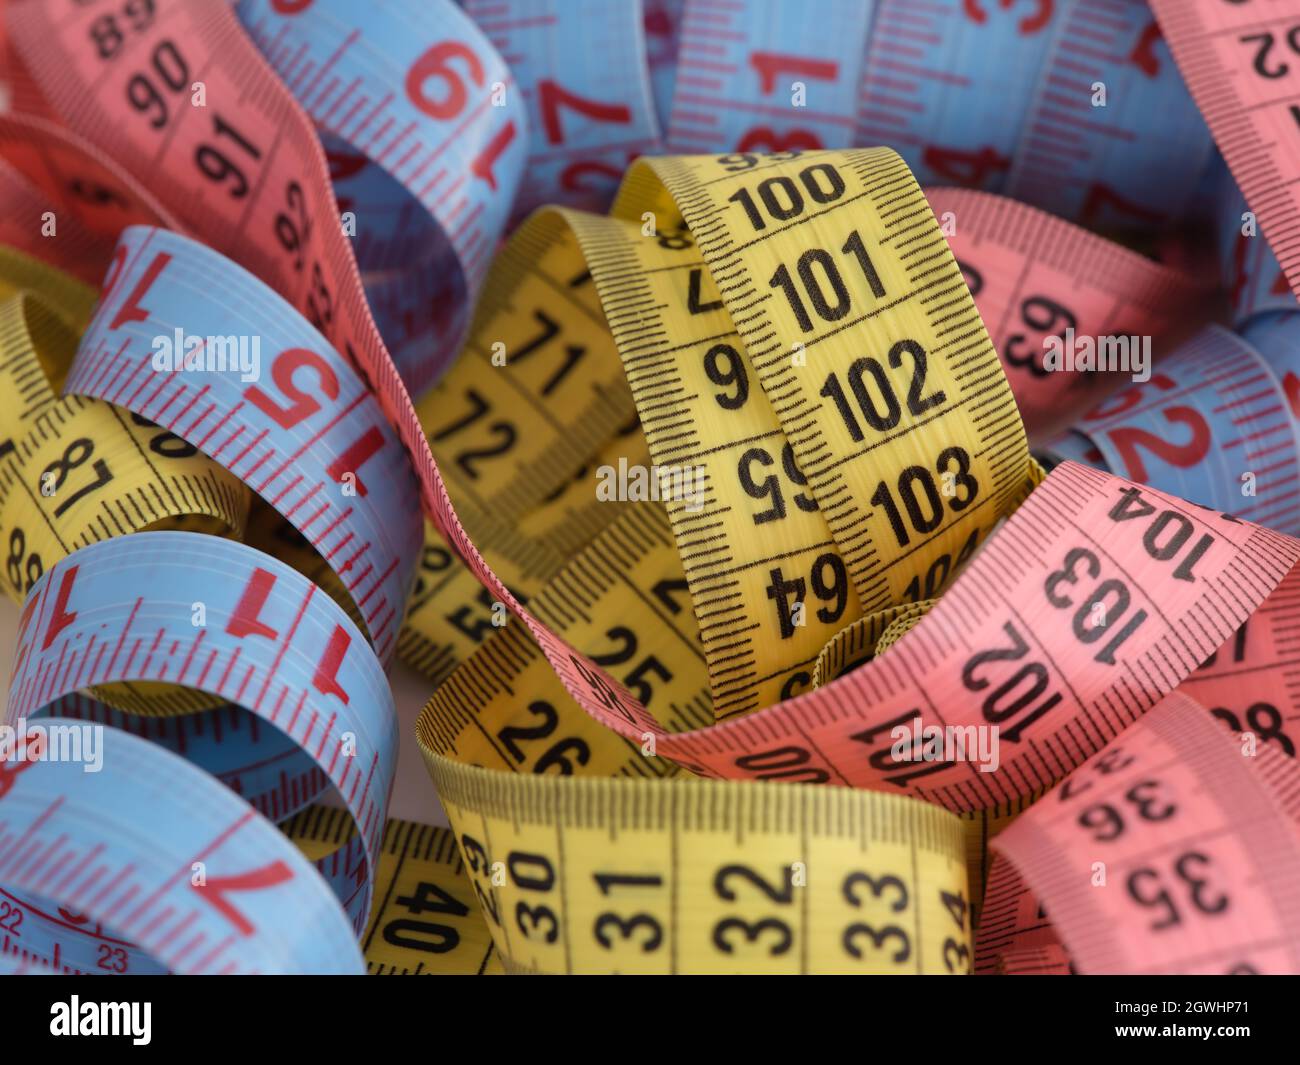 https://c8.alamy.com/comp/2GWHP71/a-lot-of-colorful-measuring-tape-in-a-pile-close-up-2GWHP71.jpg